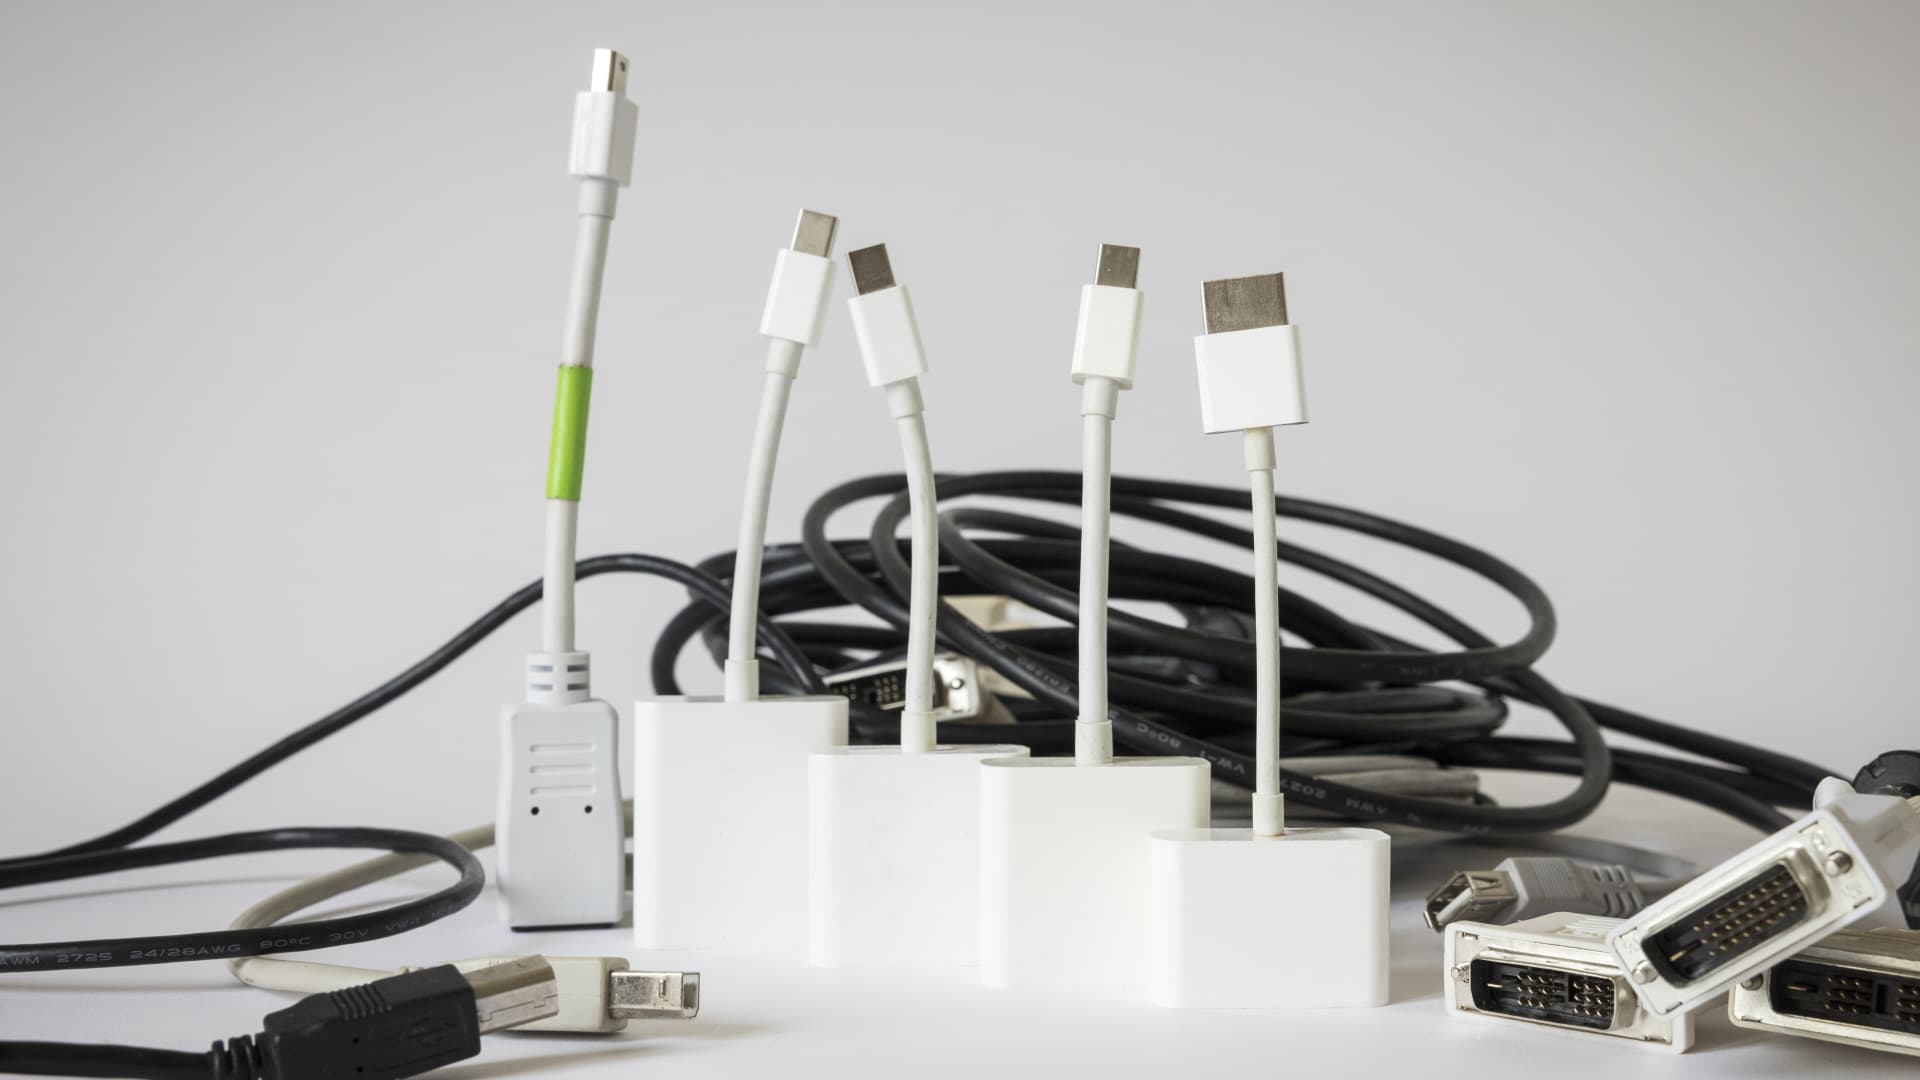 How Apple turned dongles into a big business